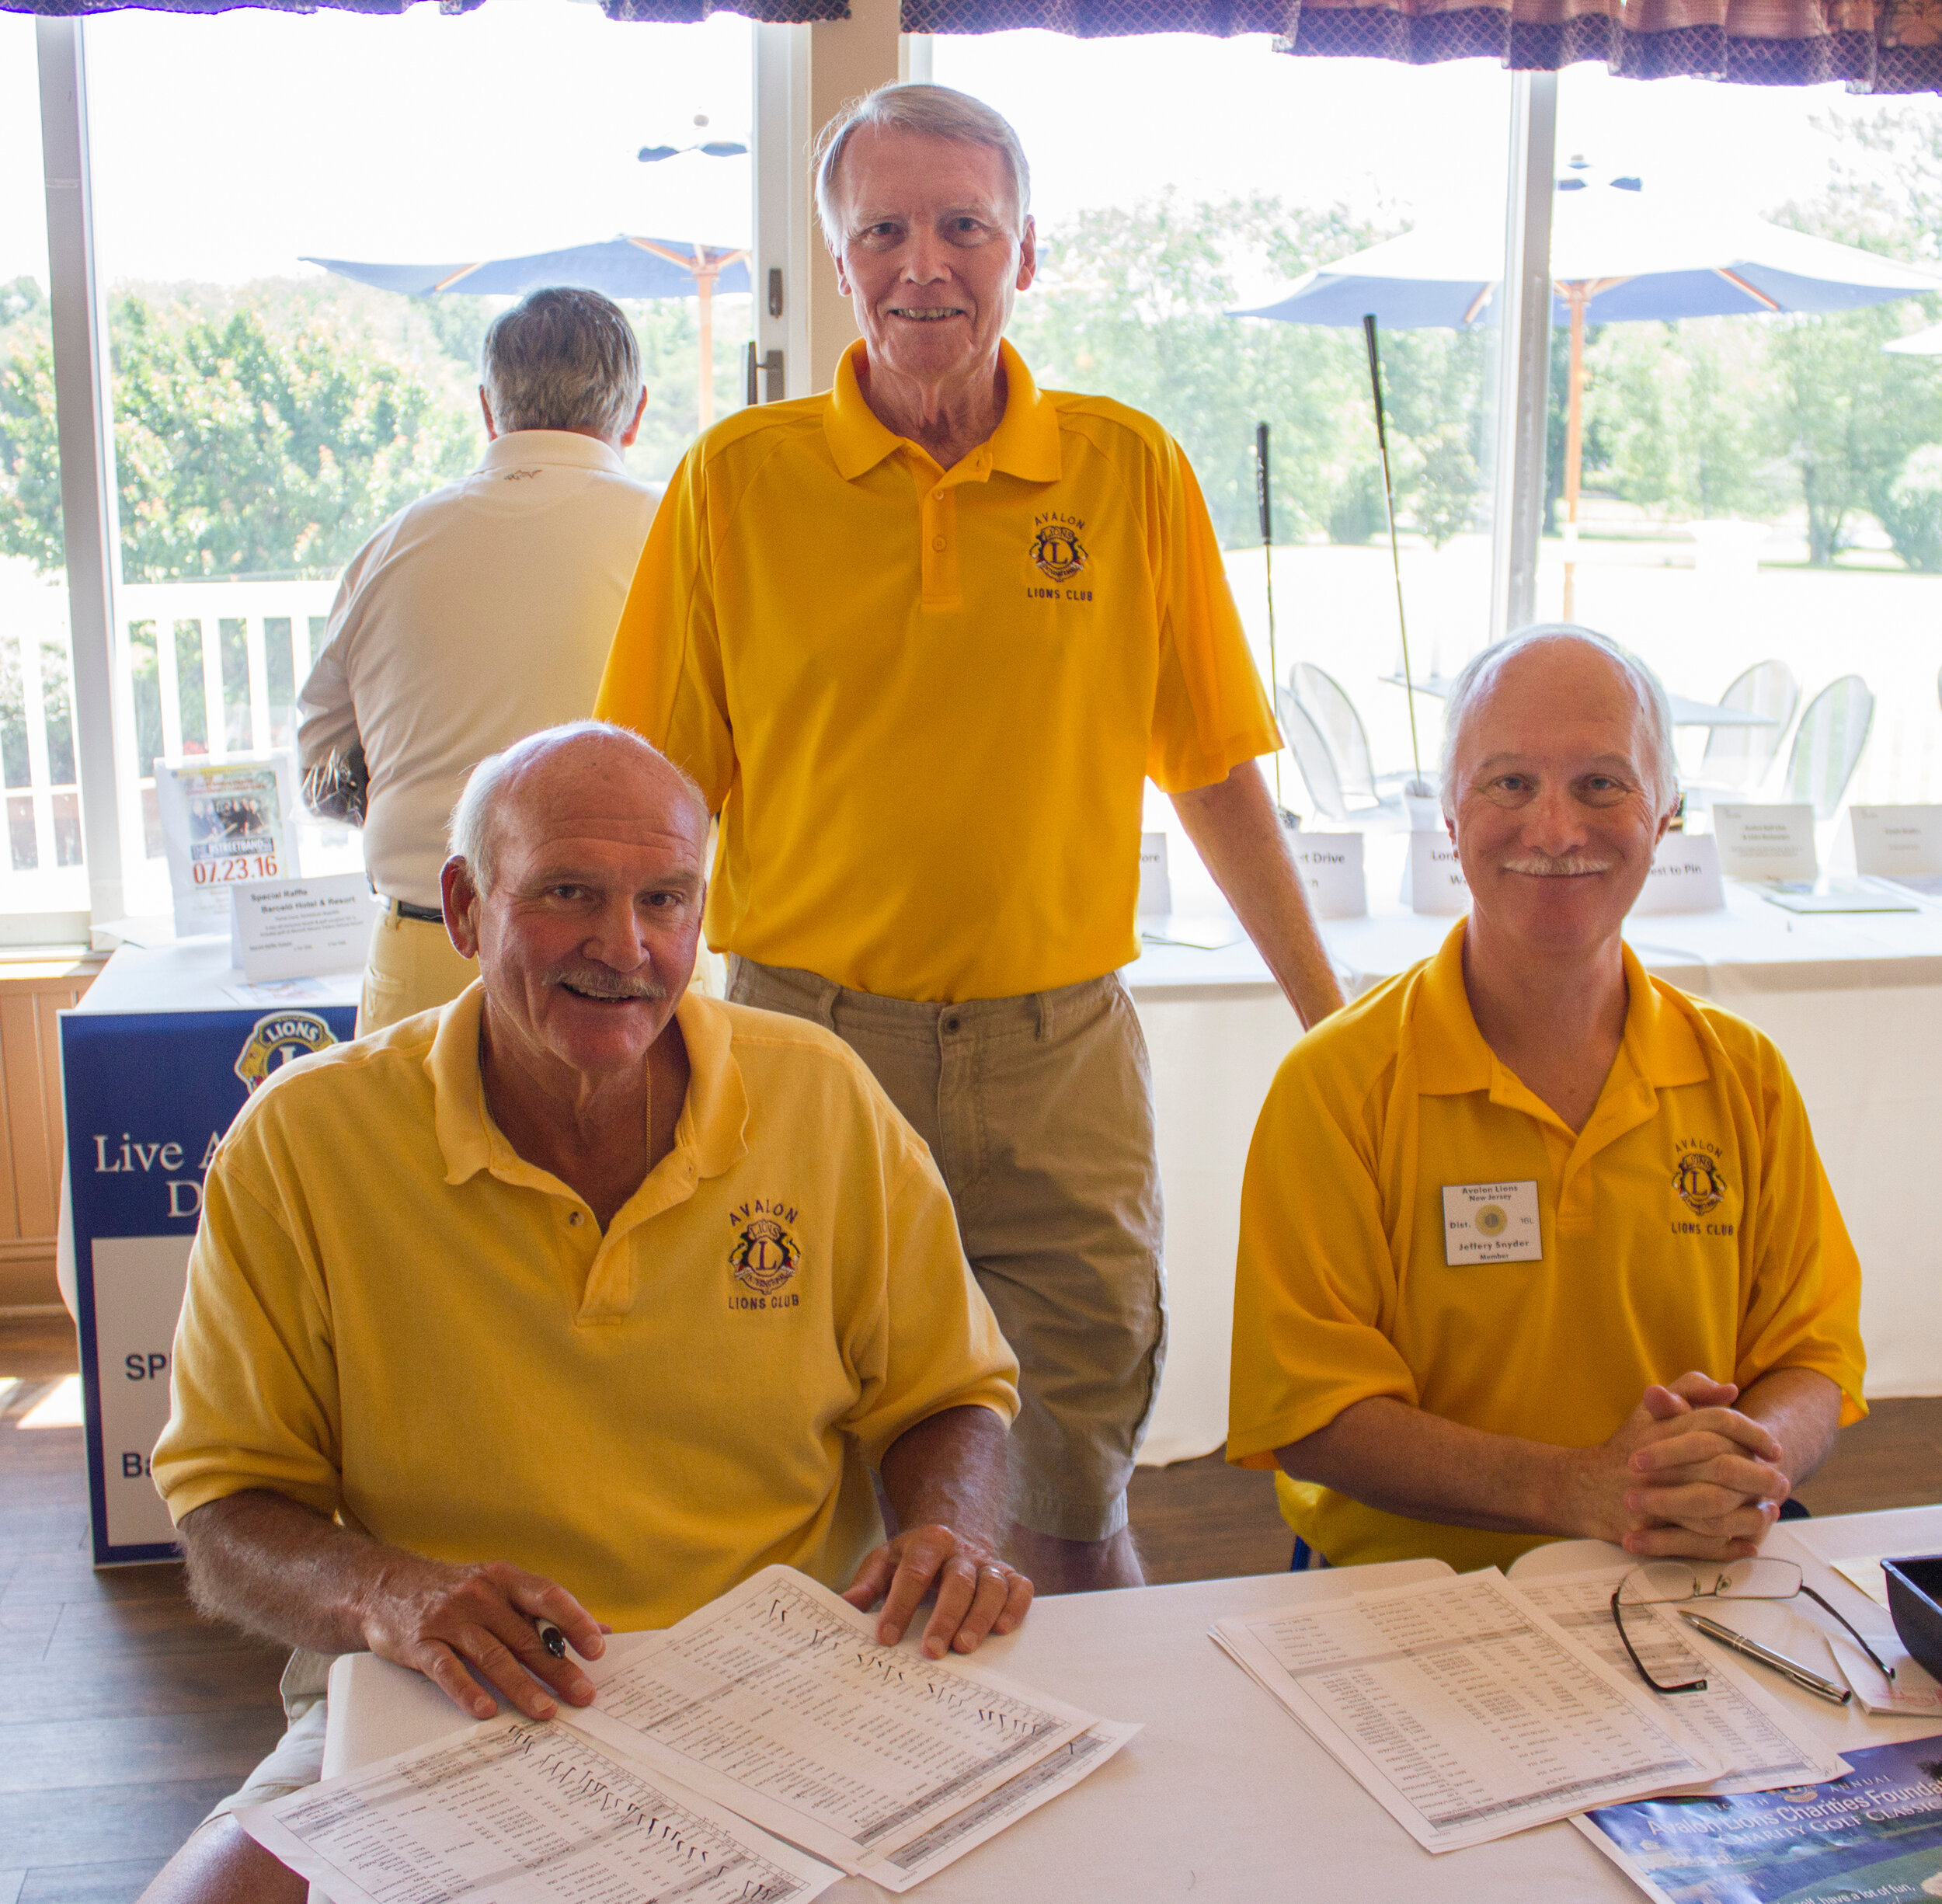 Alex Shaleway, Jeff Snyder, and Chuck Covington registering golfers  for the Lions Club annual charity golf classic.